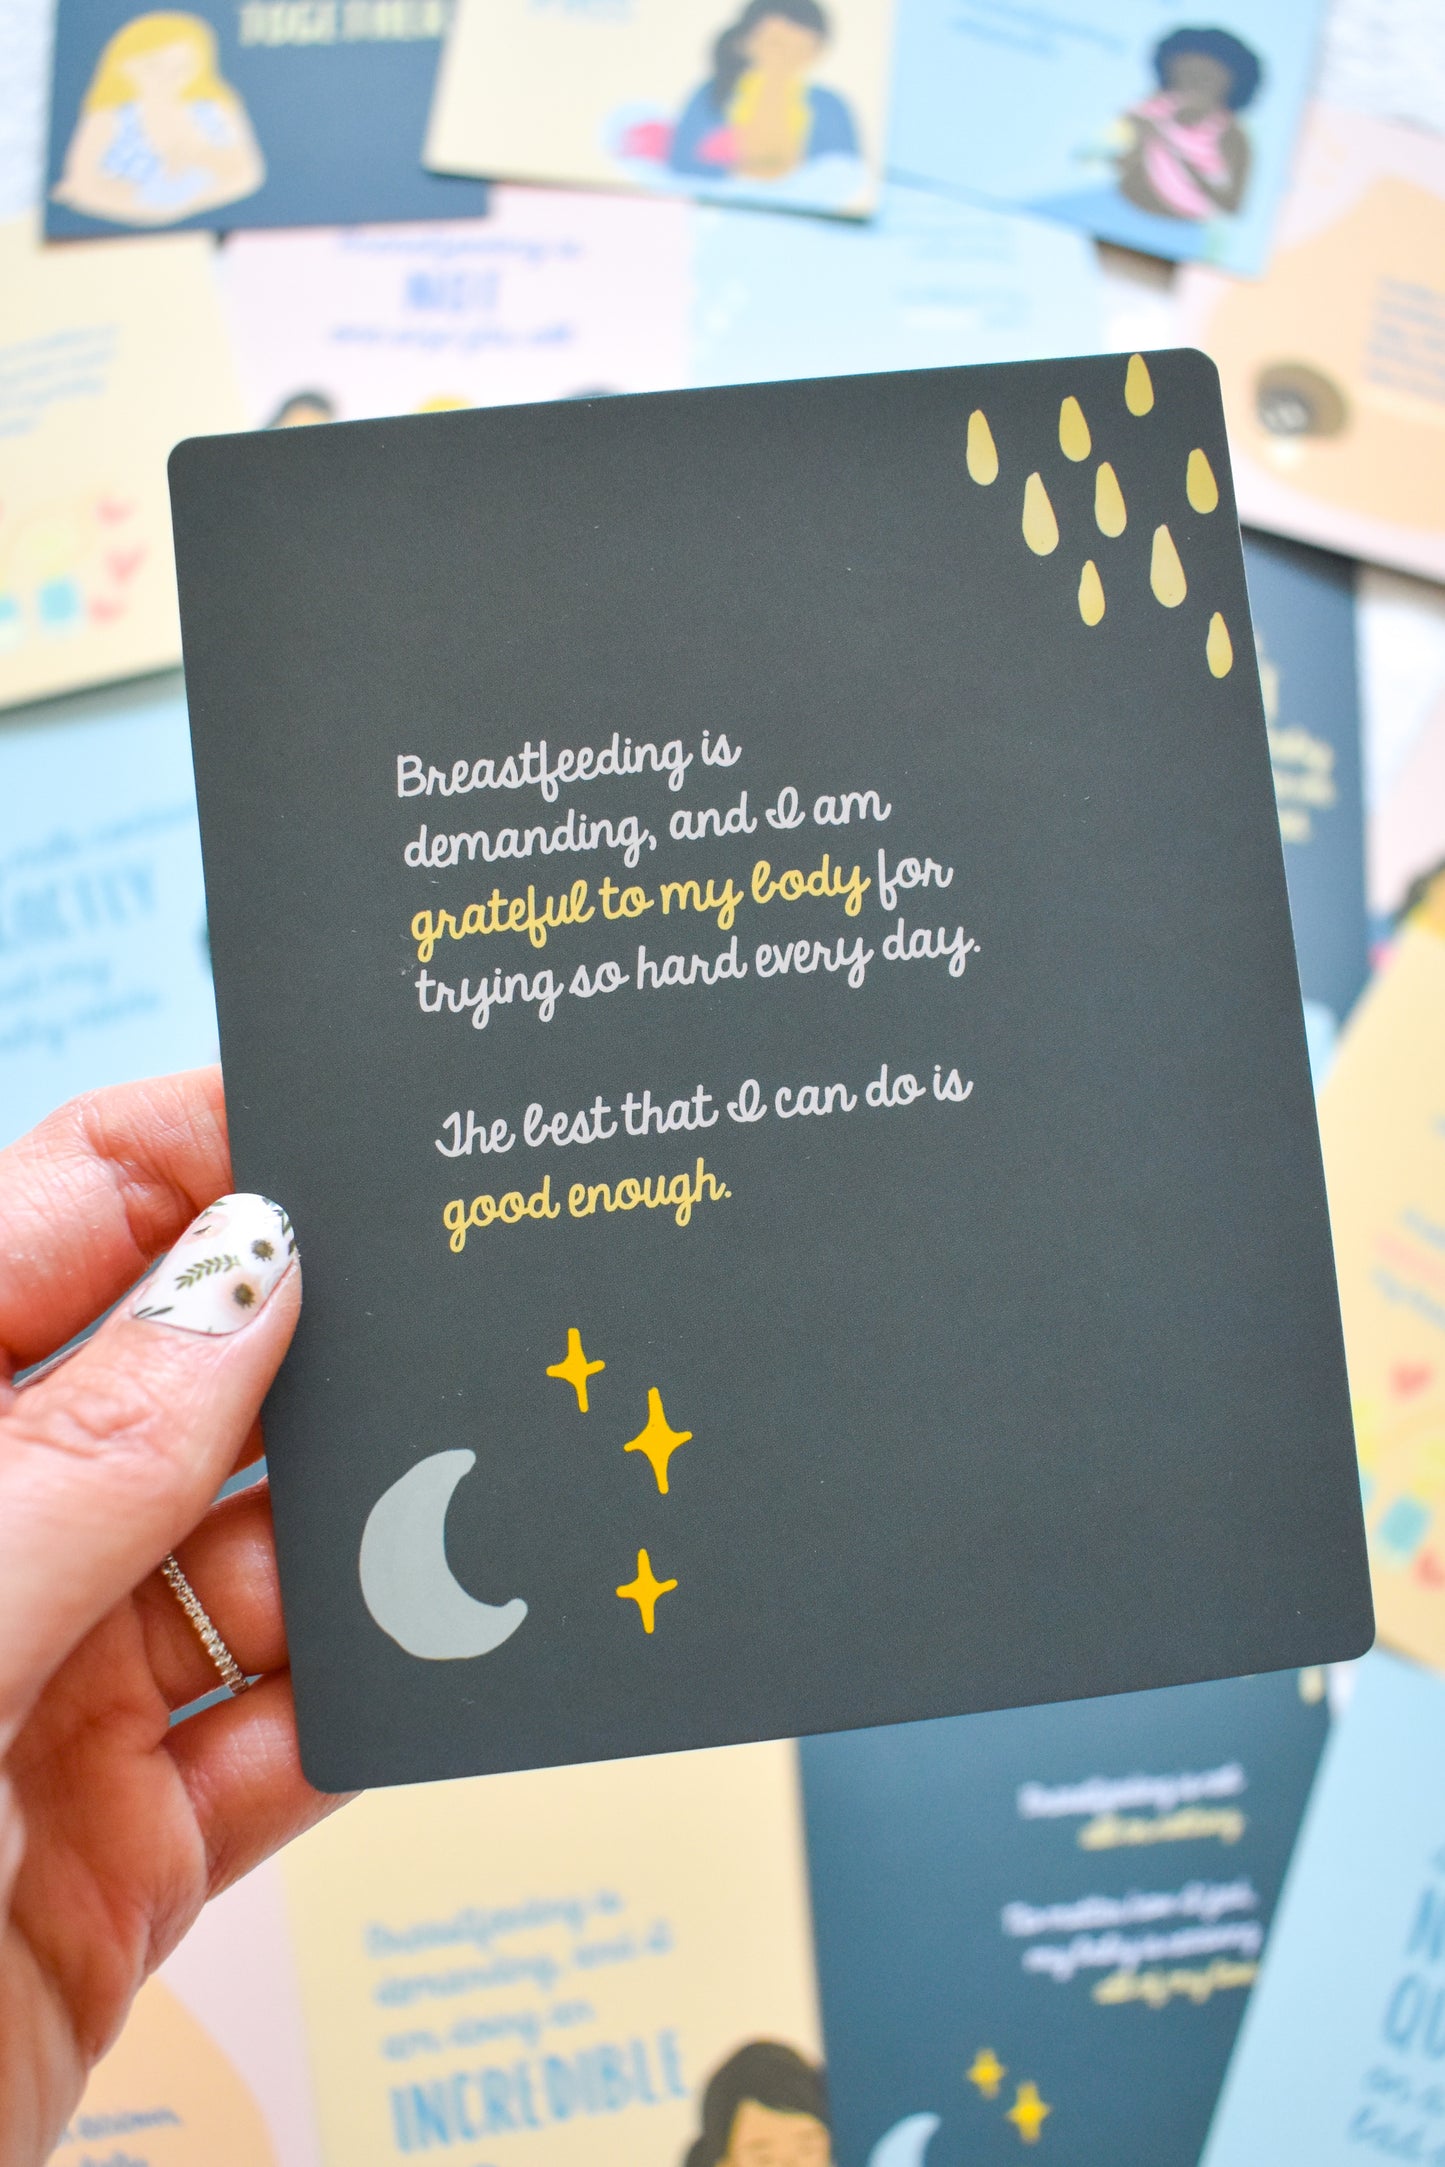 Breastfeeding Affirmation Card from Fourth Trimester Mama, reads "Breastfeeding is demanding, and I am grateful to my body for trying so hard every day. The best that I can do is good enough."